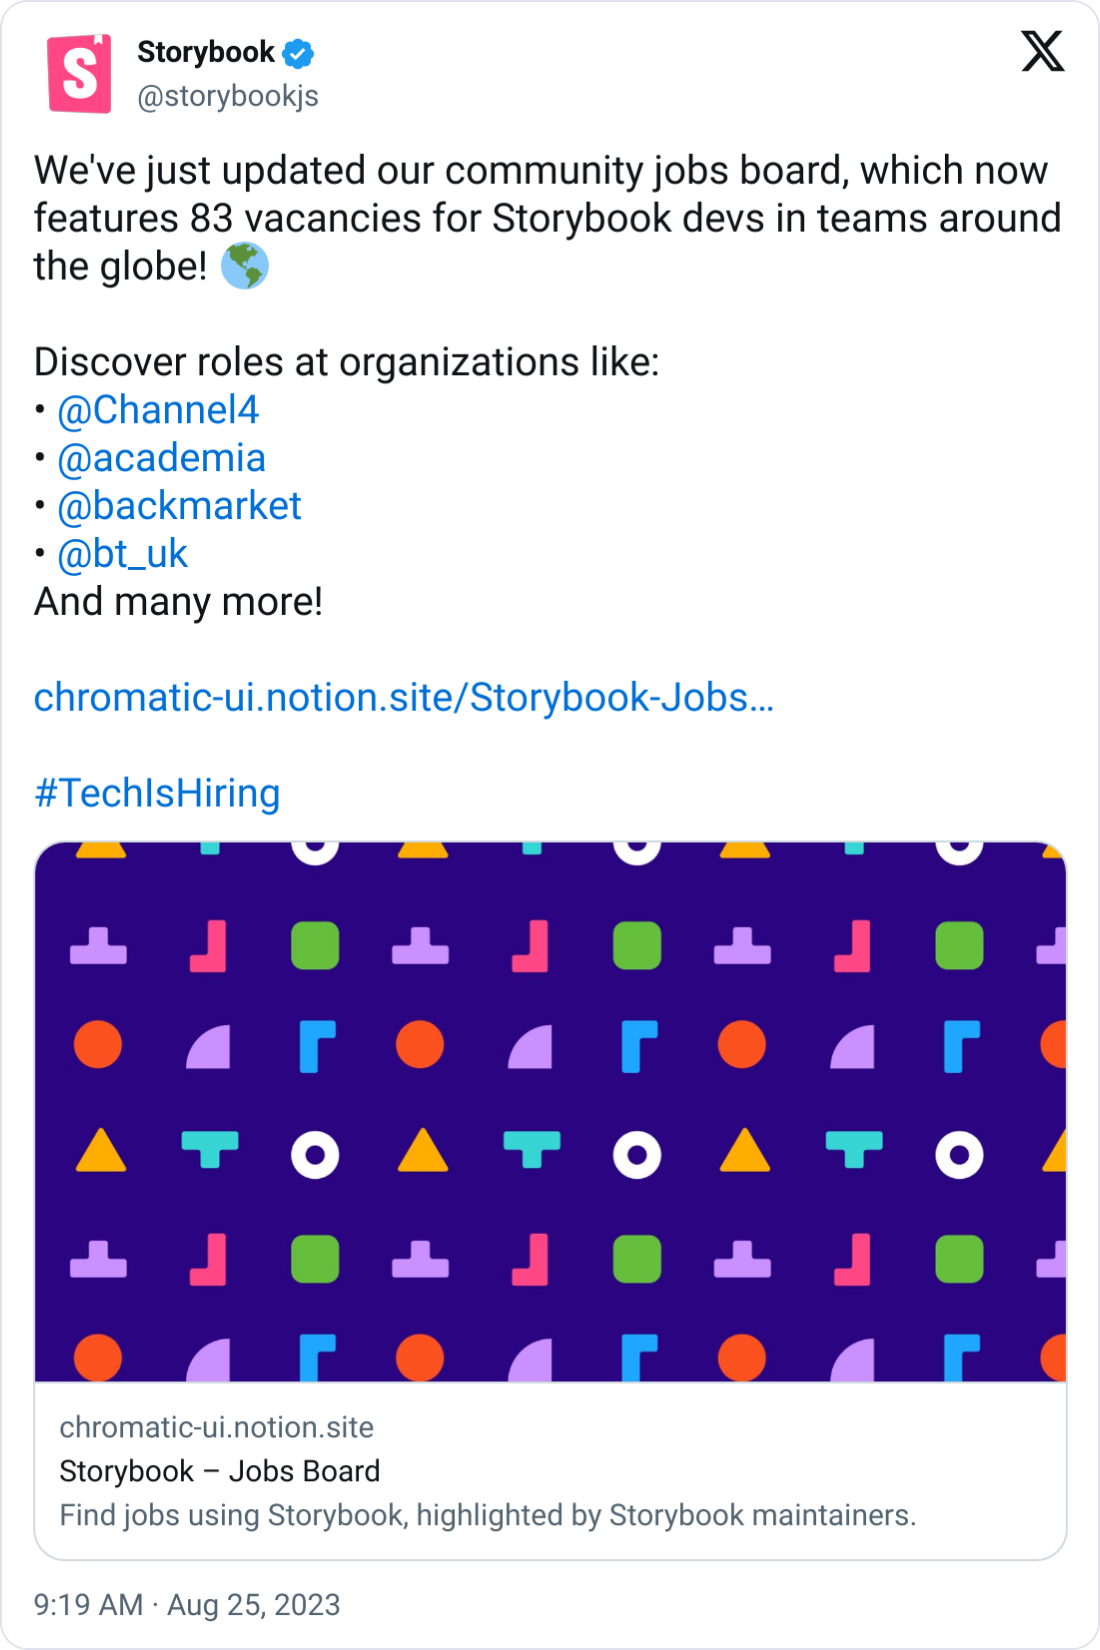 Storybook @storybookjs We've just updated our community jobs board, which now features 83 vacancies for Storybook devs in teams around the globe! 🌎  Discover roles at organizations like: •  @Channel4  •  @academia  •  @backmarket  •  @bt_uk  And many more!  https://chromatic-ui.notion.site/Storybook-Jobs-Board-950e001e4a114a39980a5b09c3a3b3e1?pvs=4  #TechIsHiring